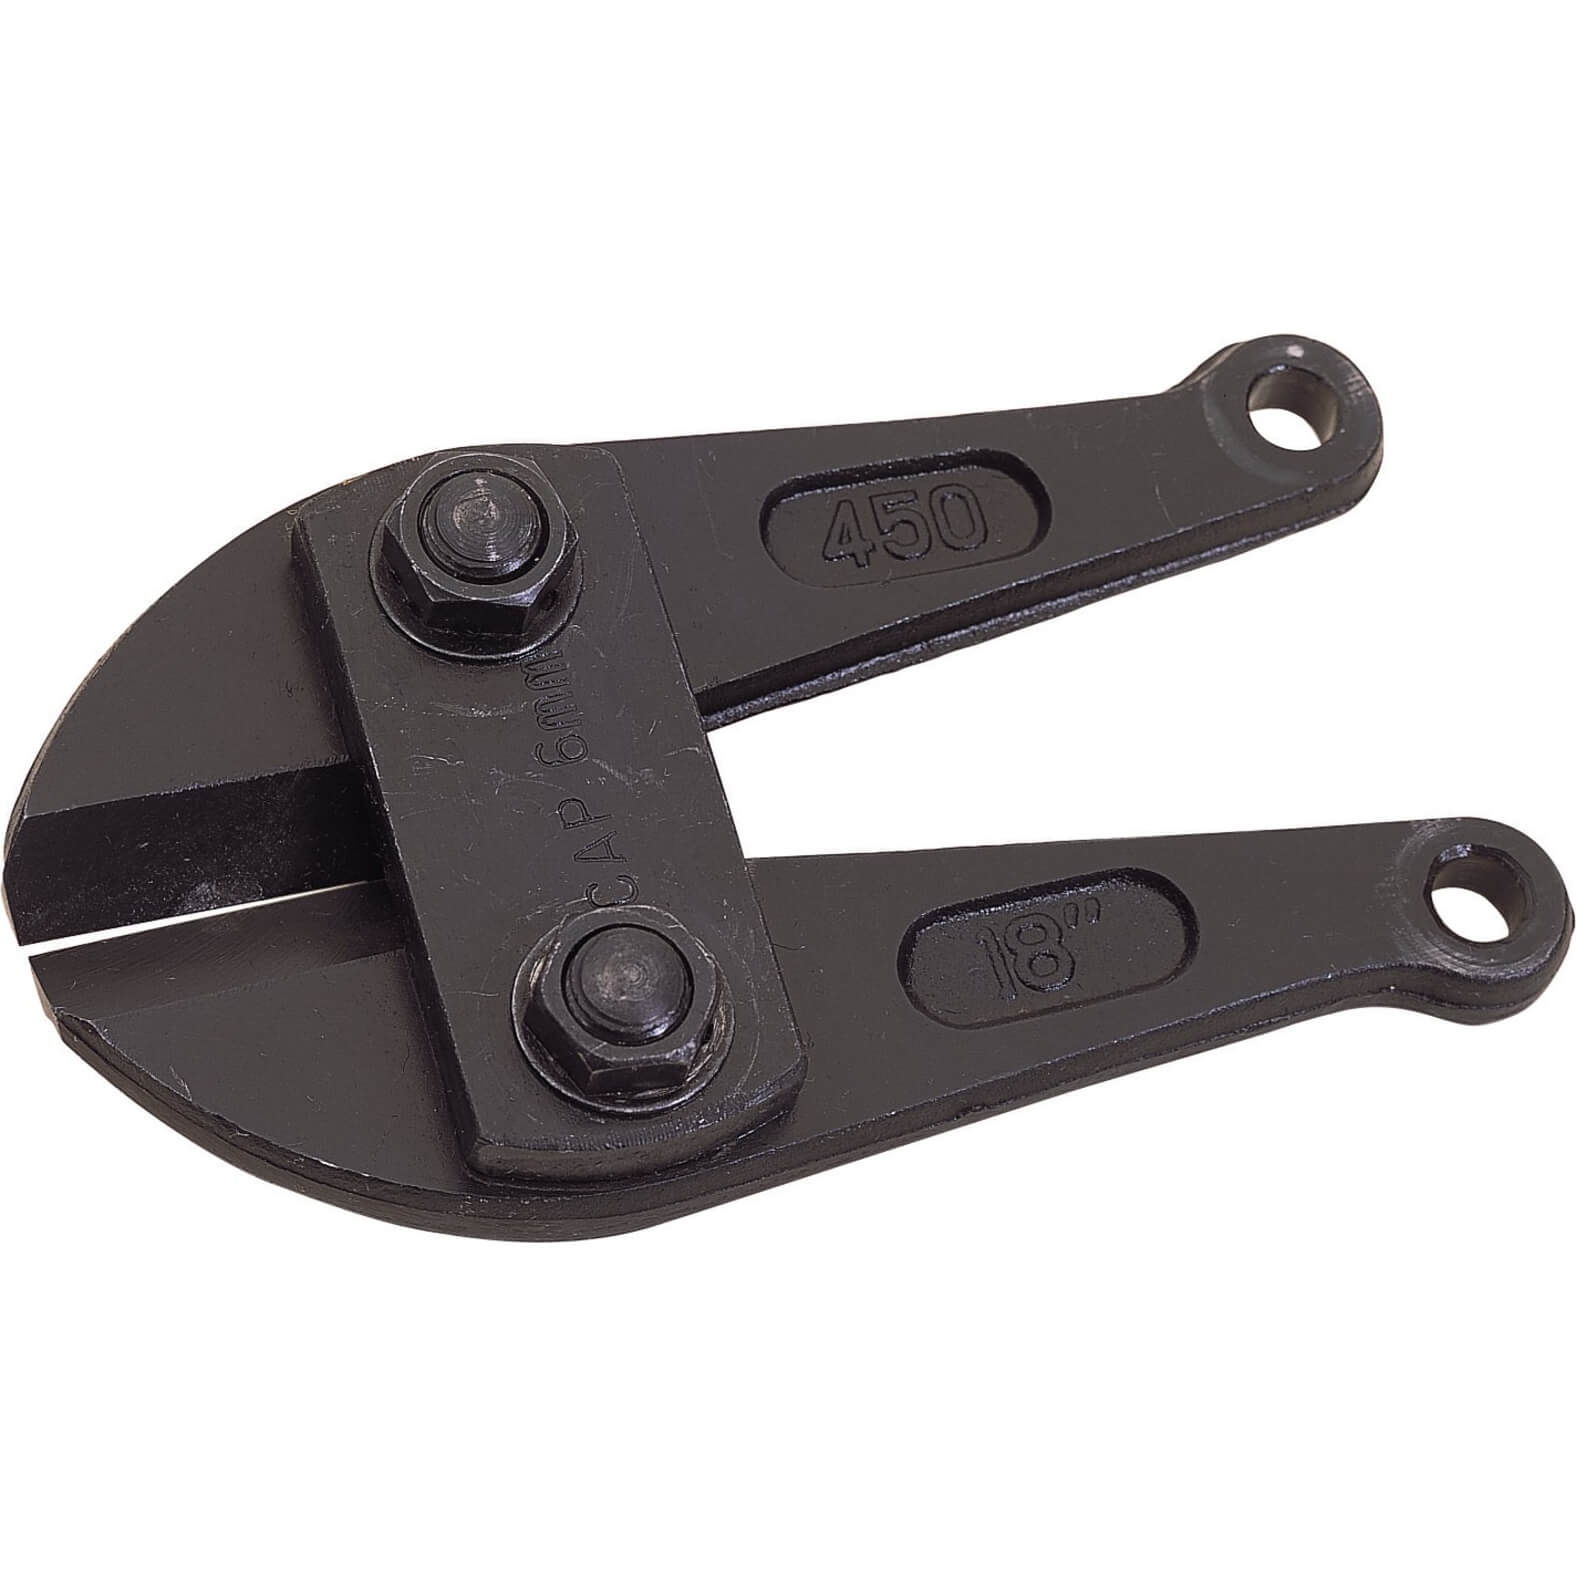 Image of Draper Replacement Jaws 54266 Bolt Cutter